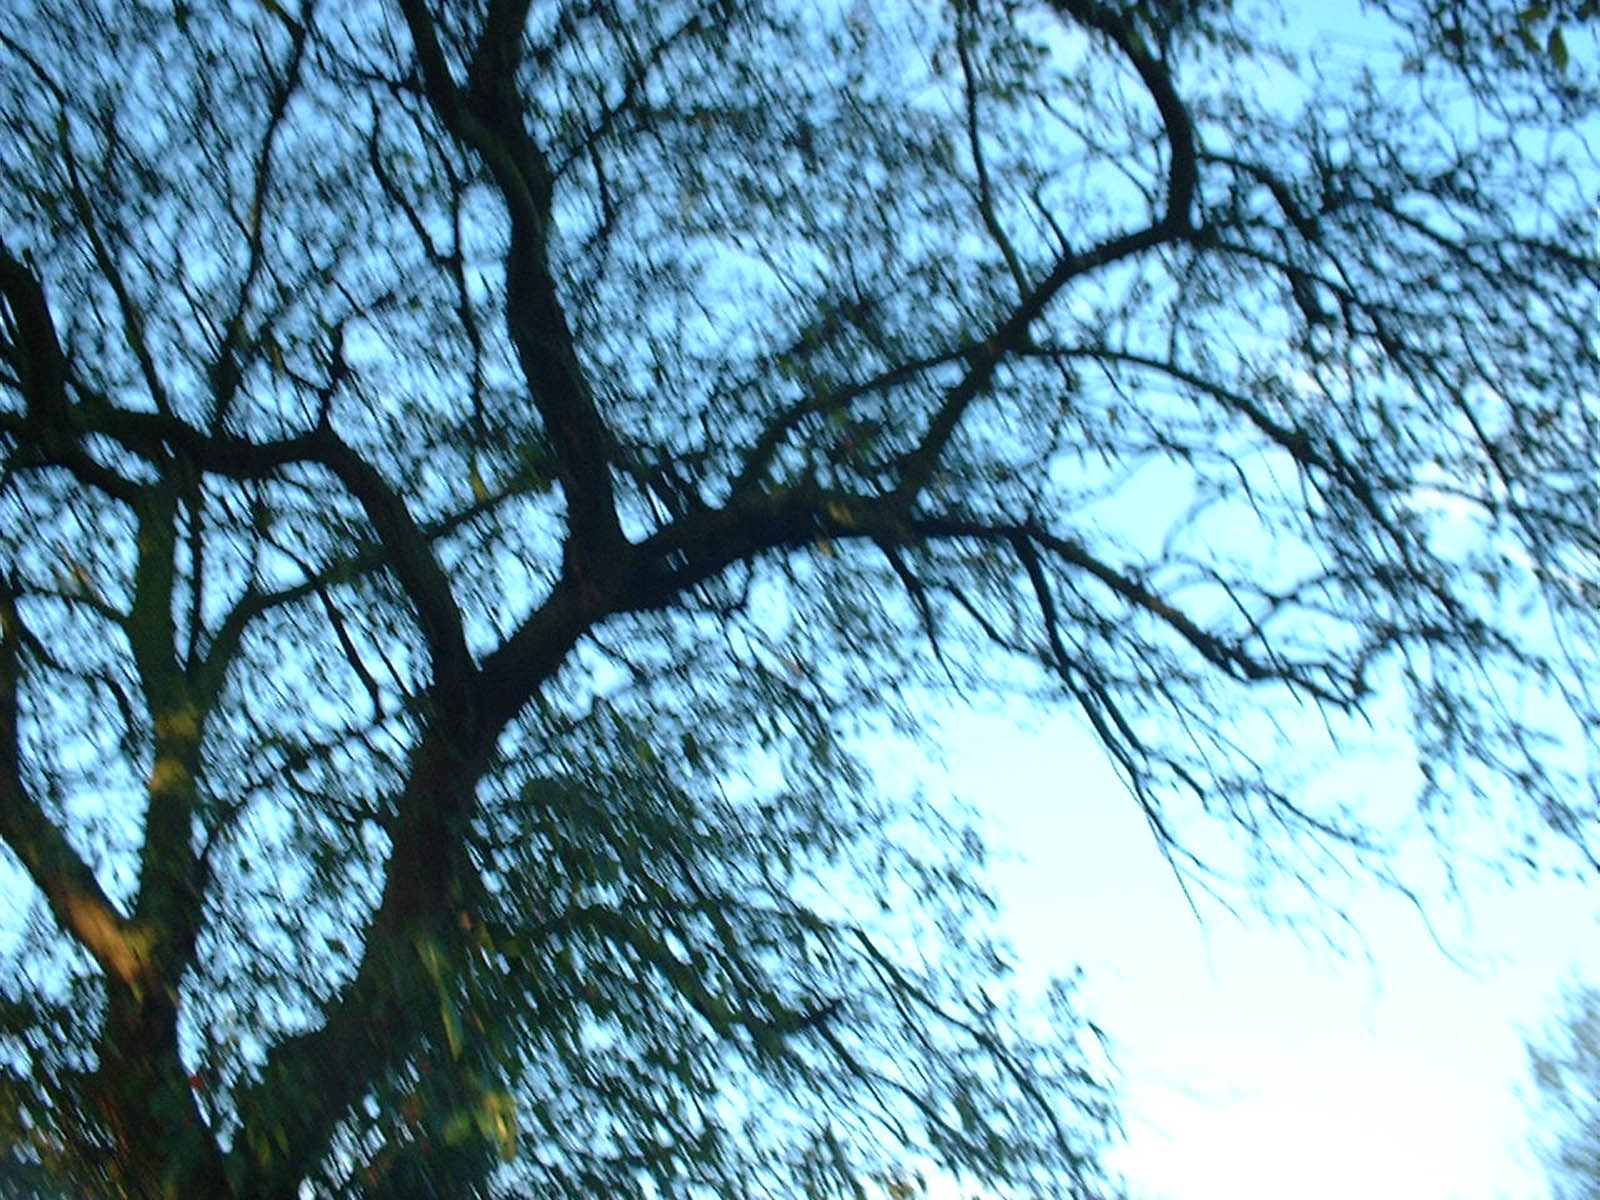 Blurry Trees Image Photos Pictures